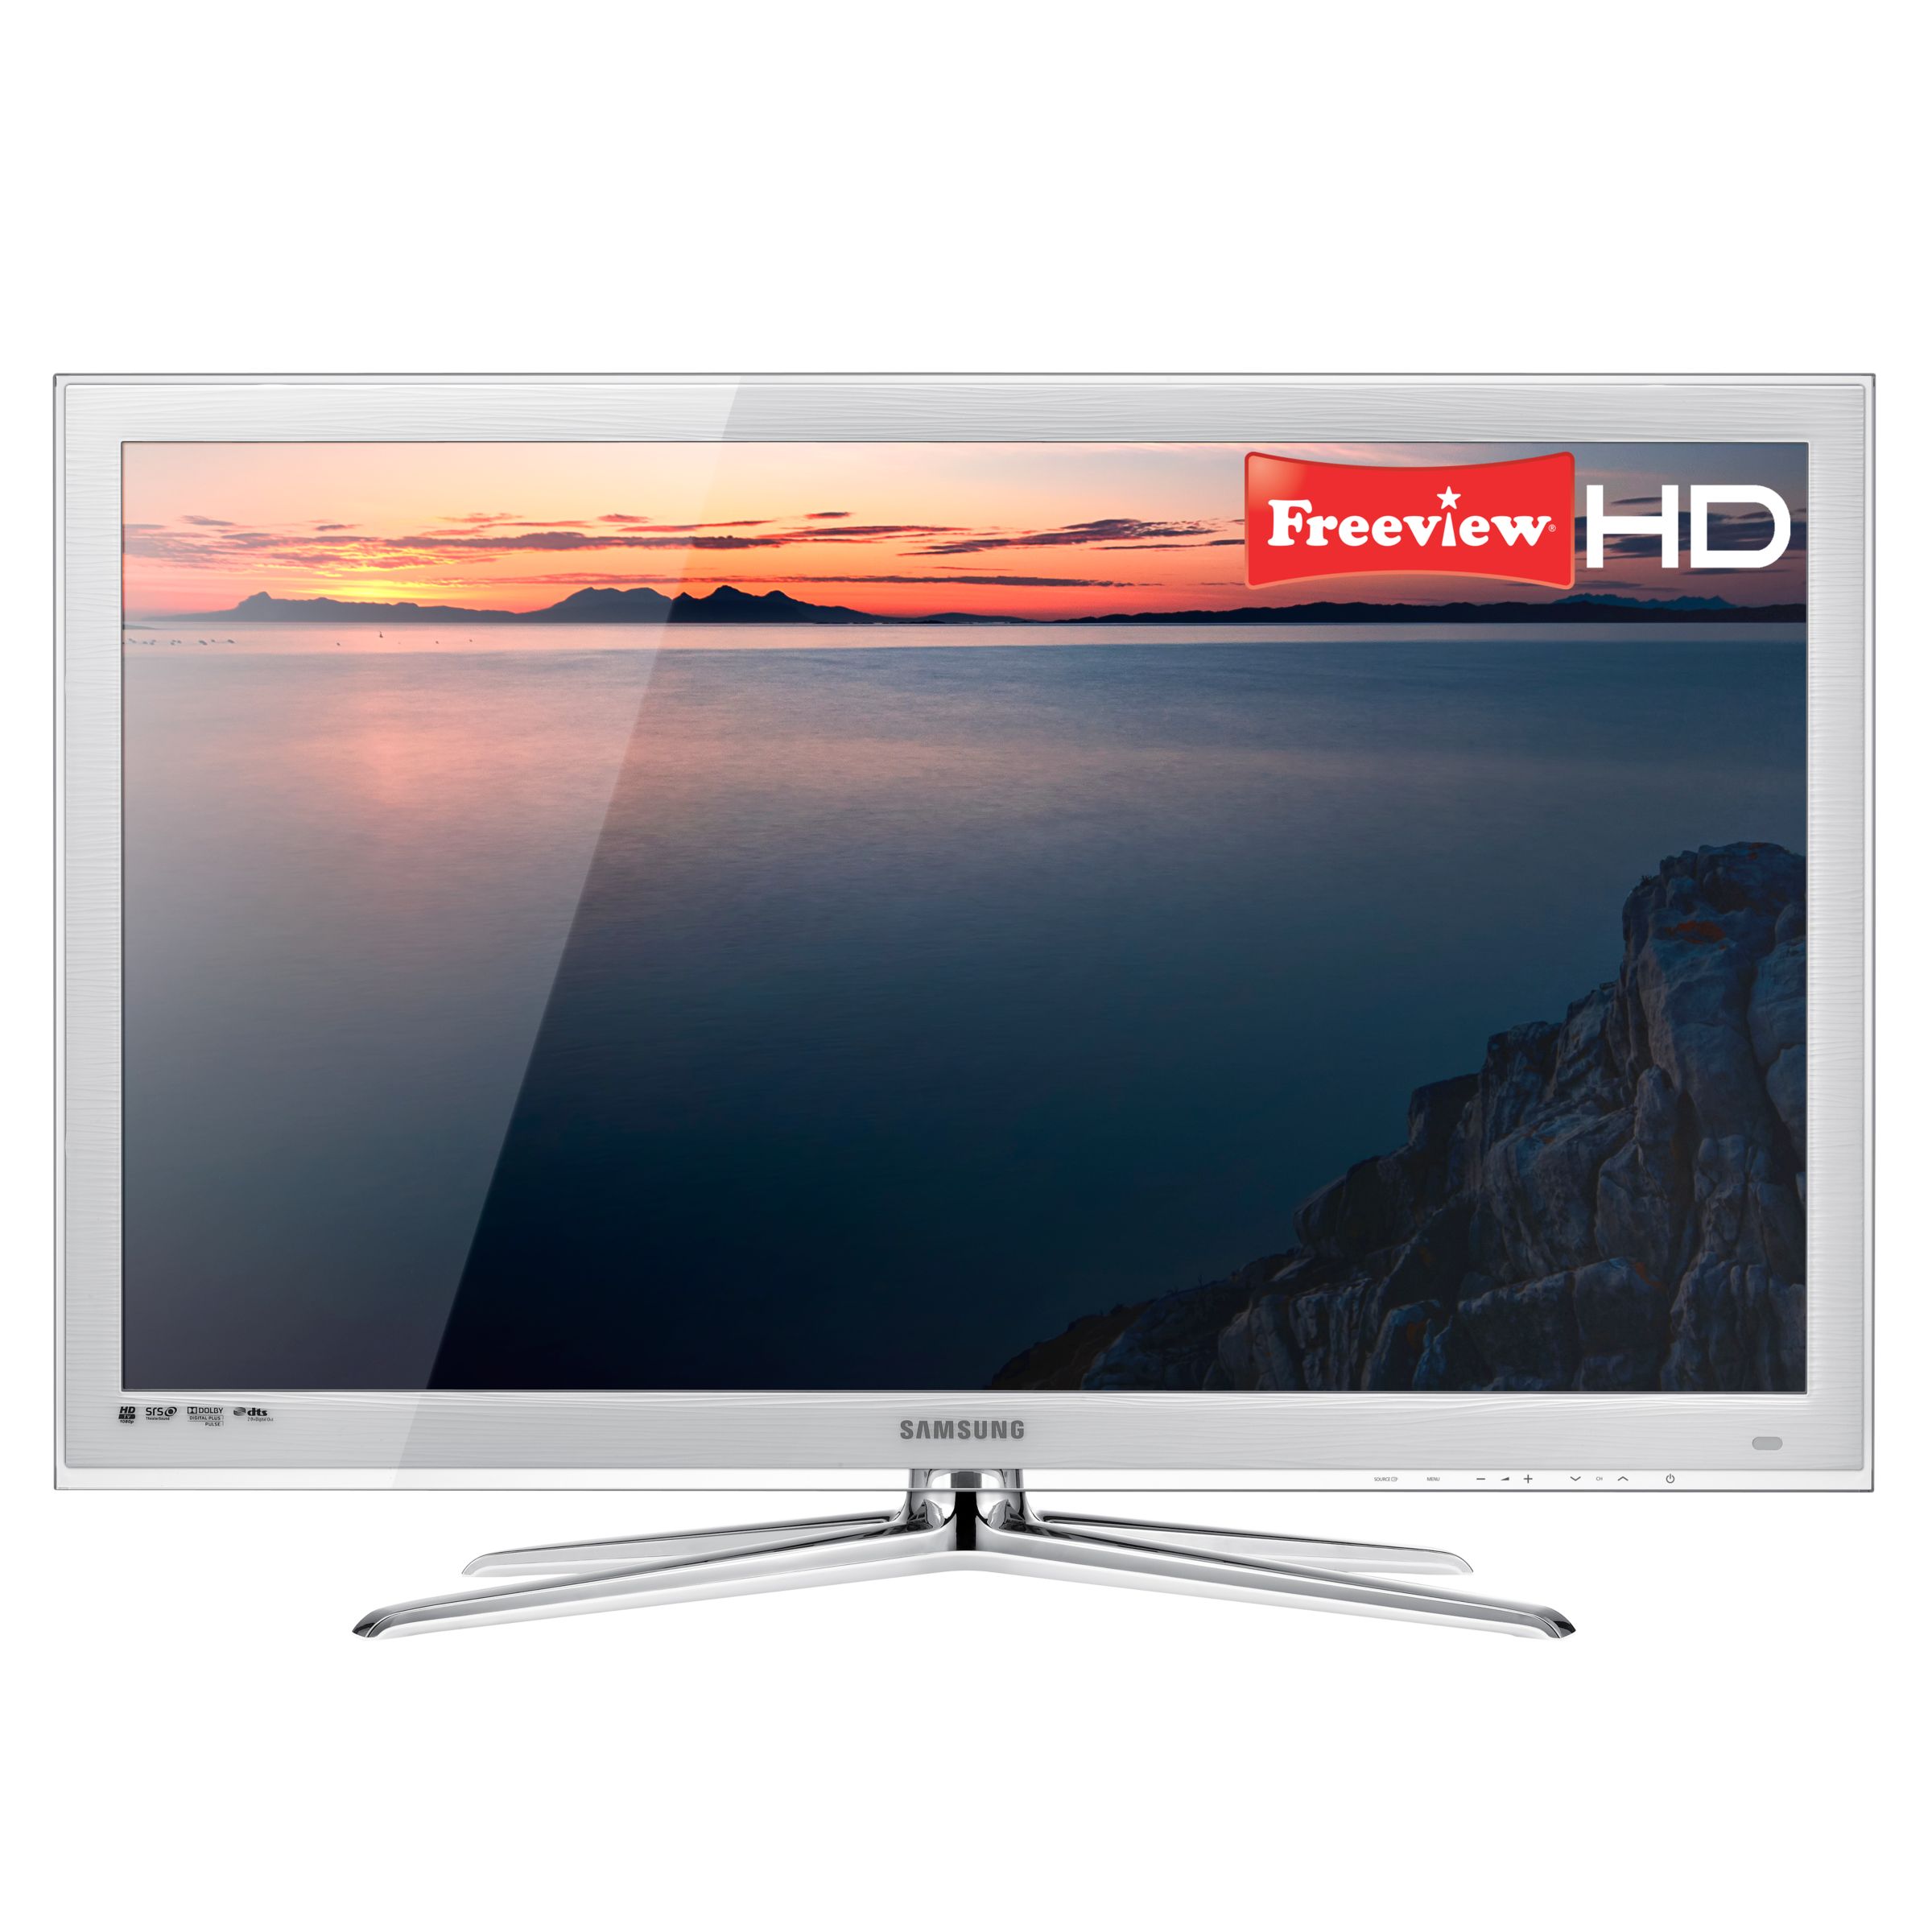 Samsung UE32C6510 LED HD 1080p Digital Television, 32 Inch with Built-in Freeview HD, White at JohnLewis